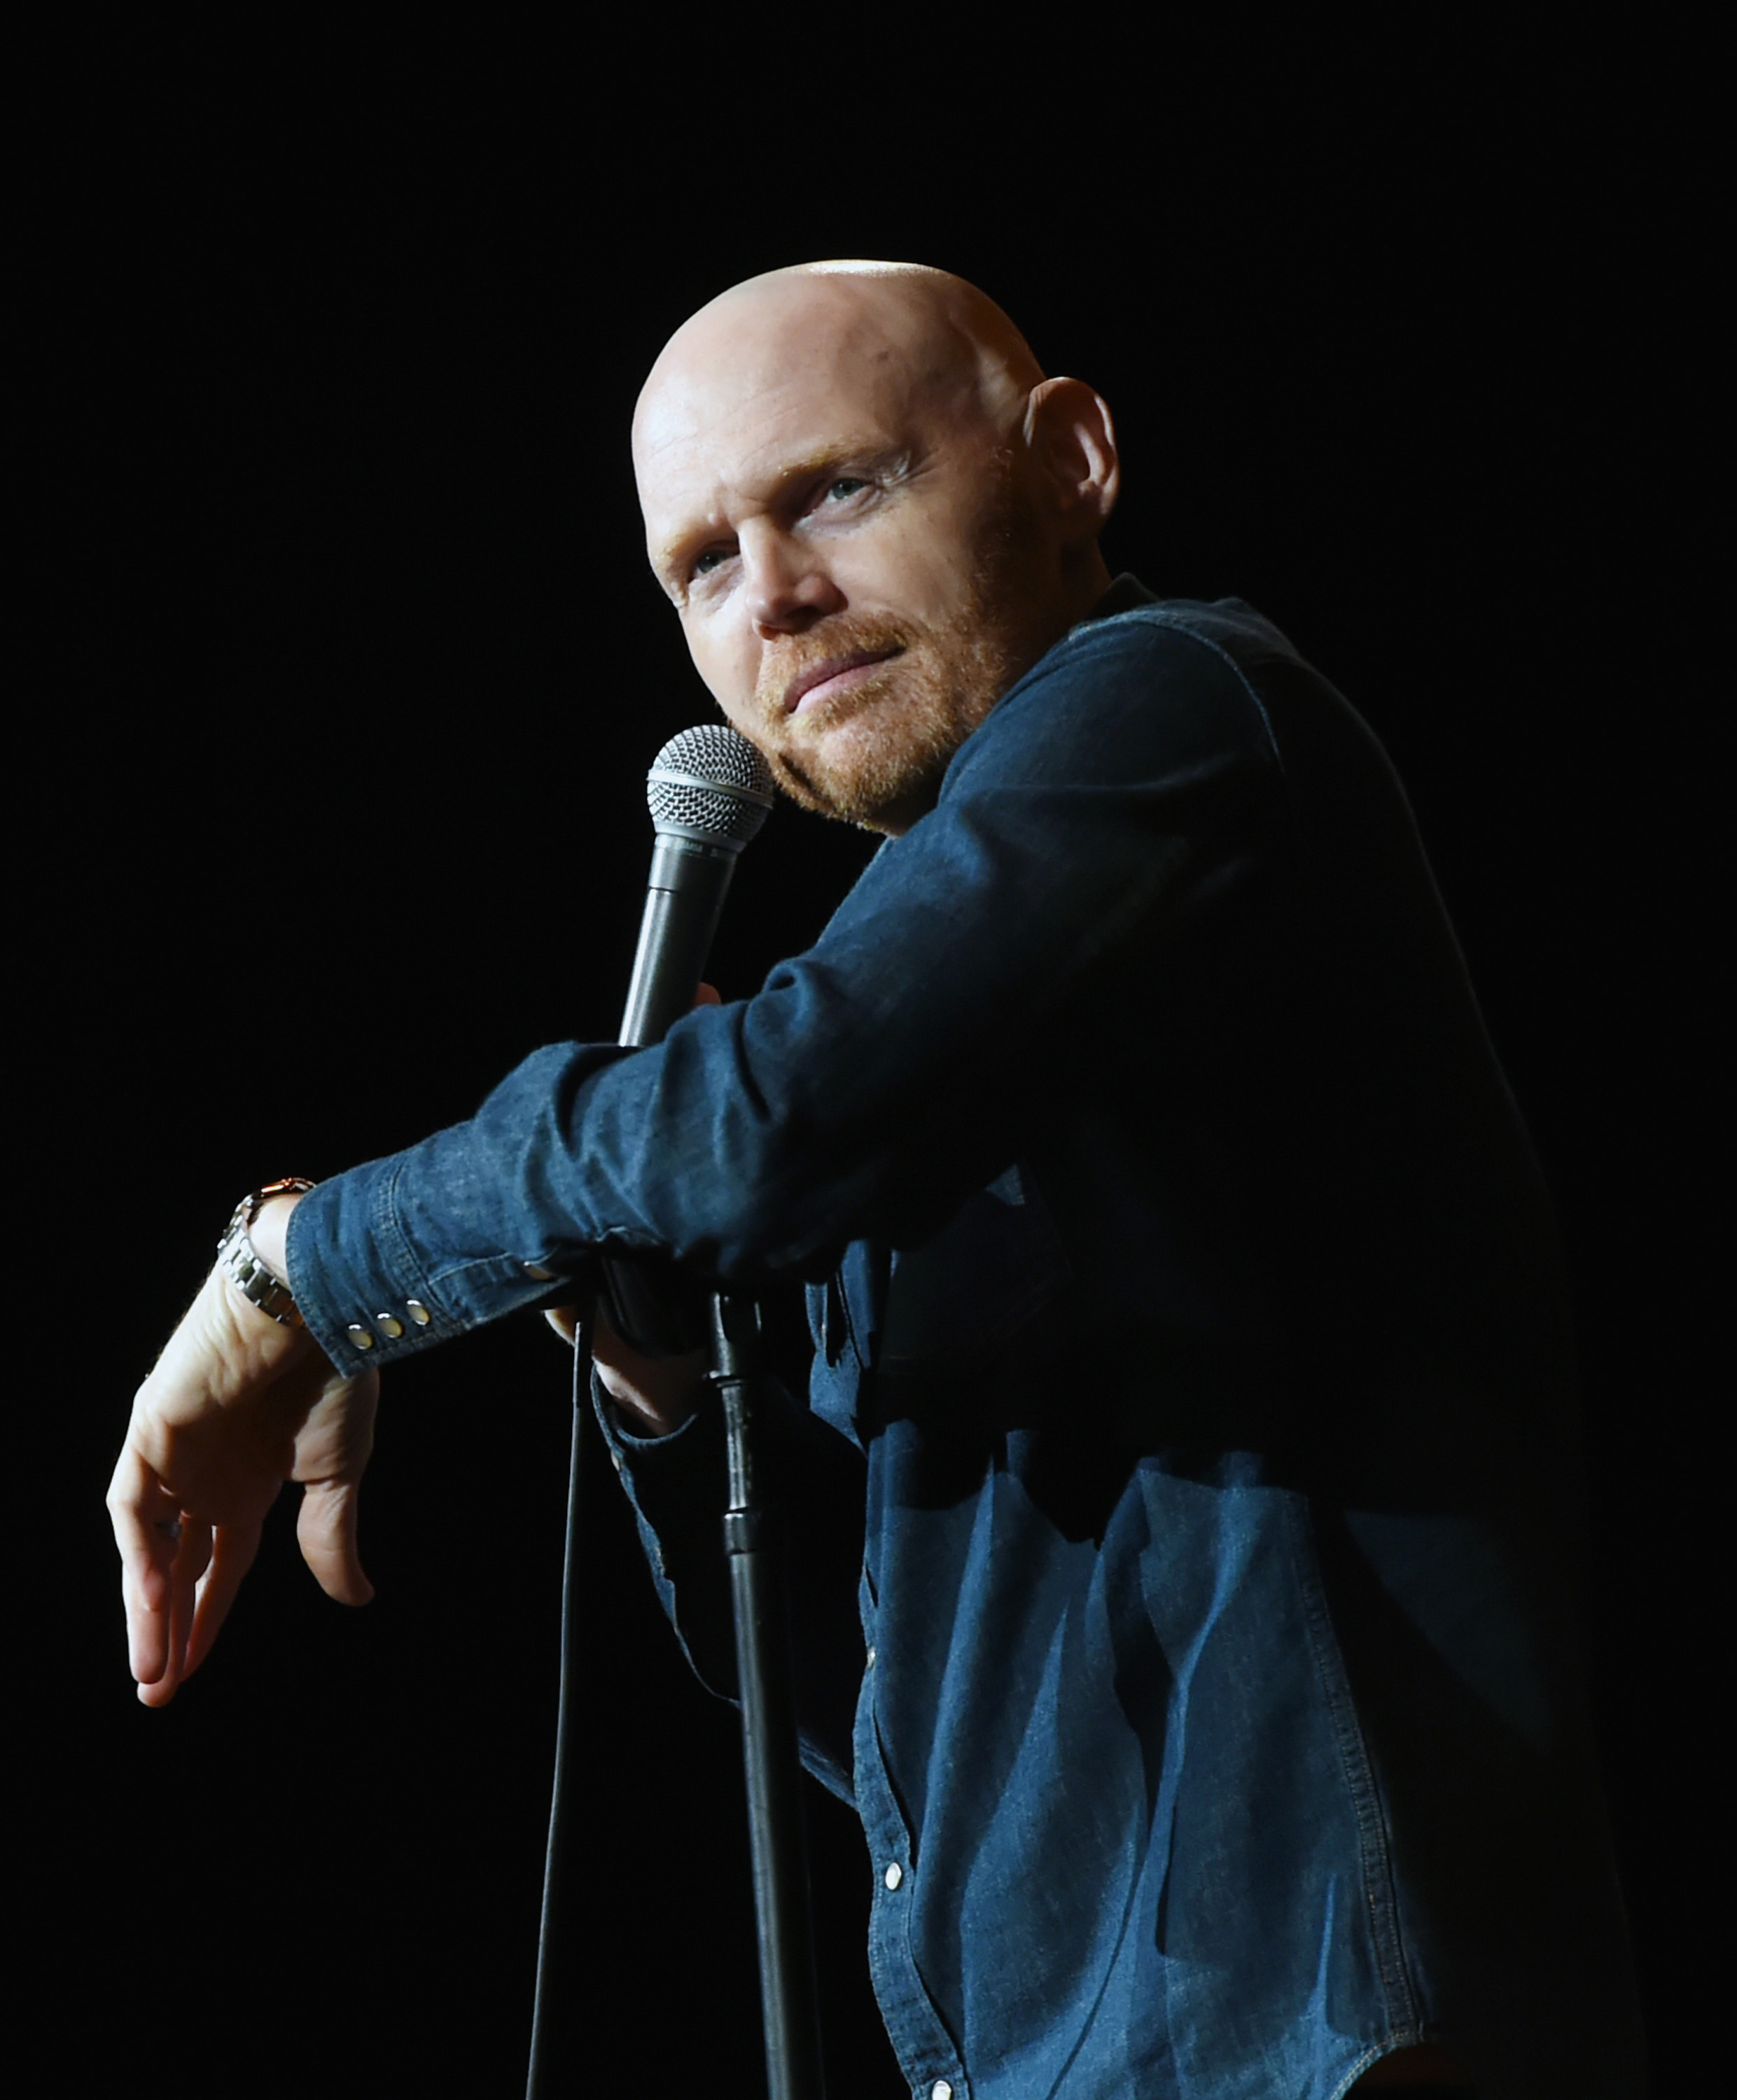 What did Bill Burr say about CNN?